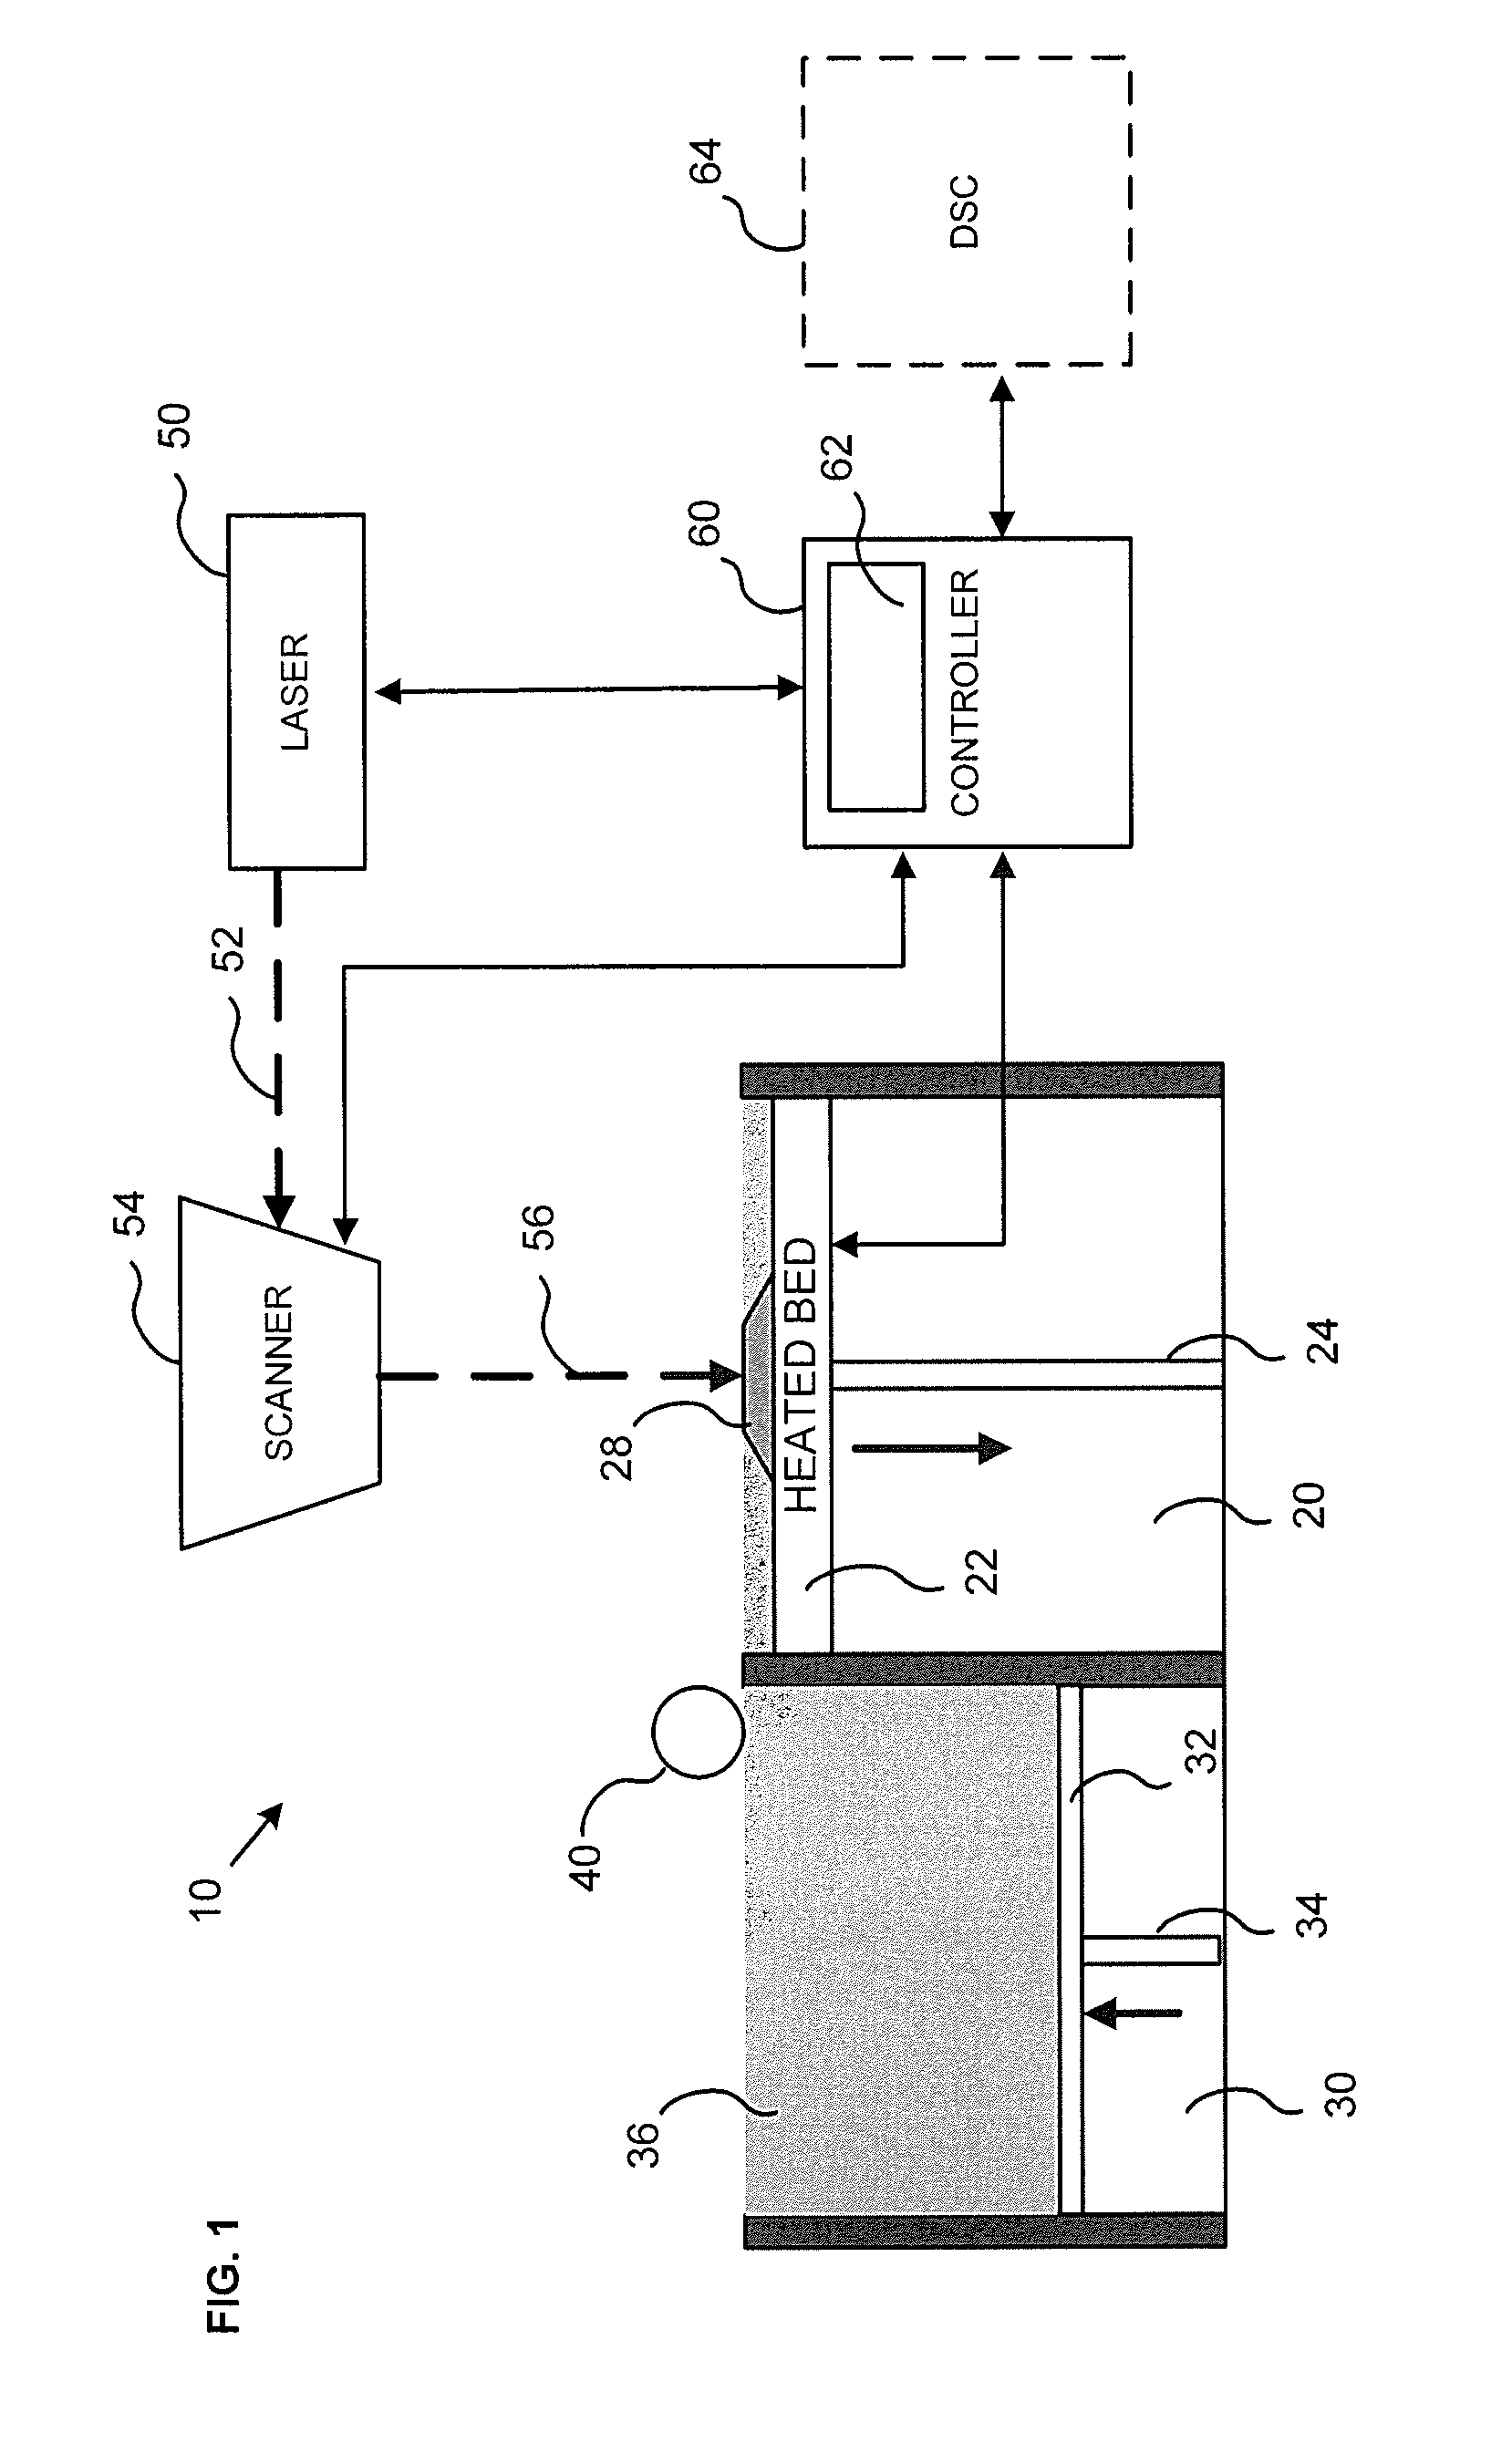 Method For Analytically Determining SLS Bed Temperatures